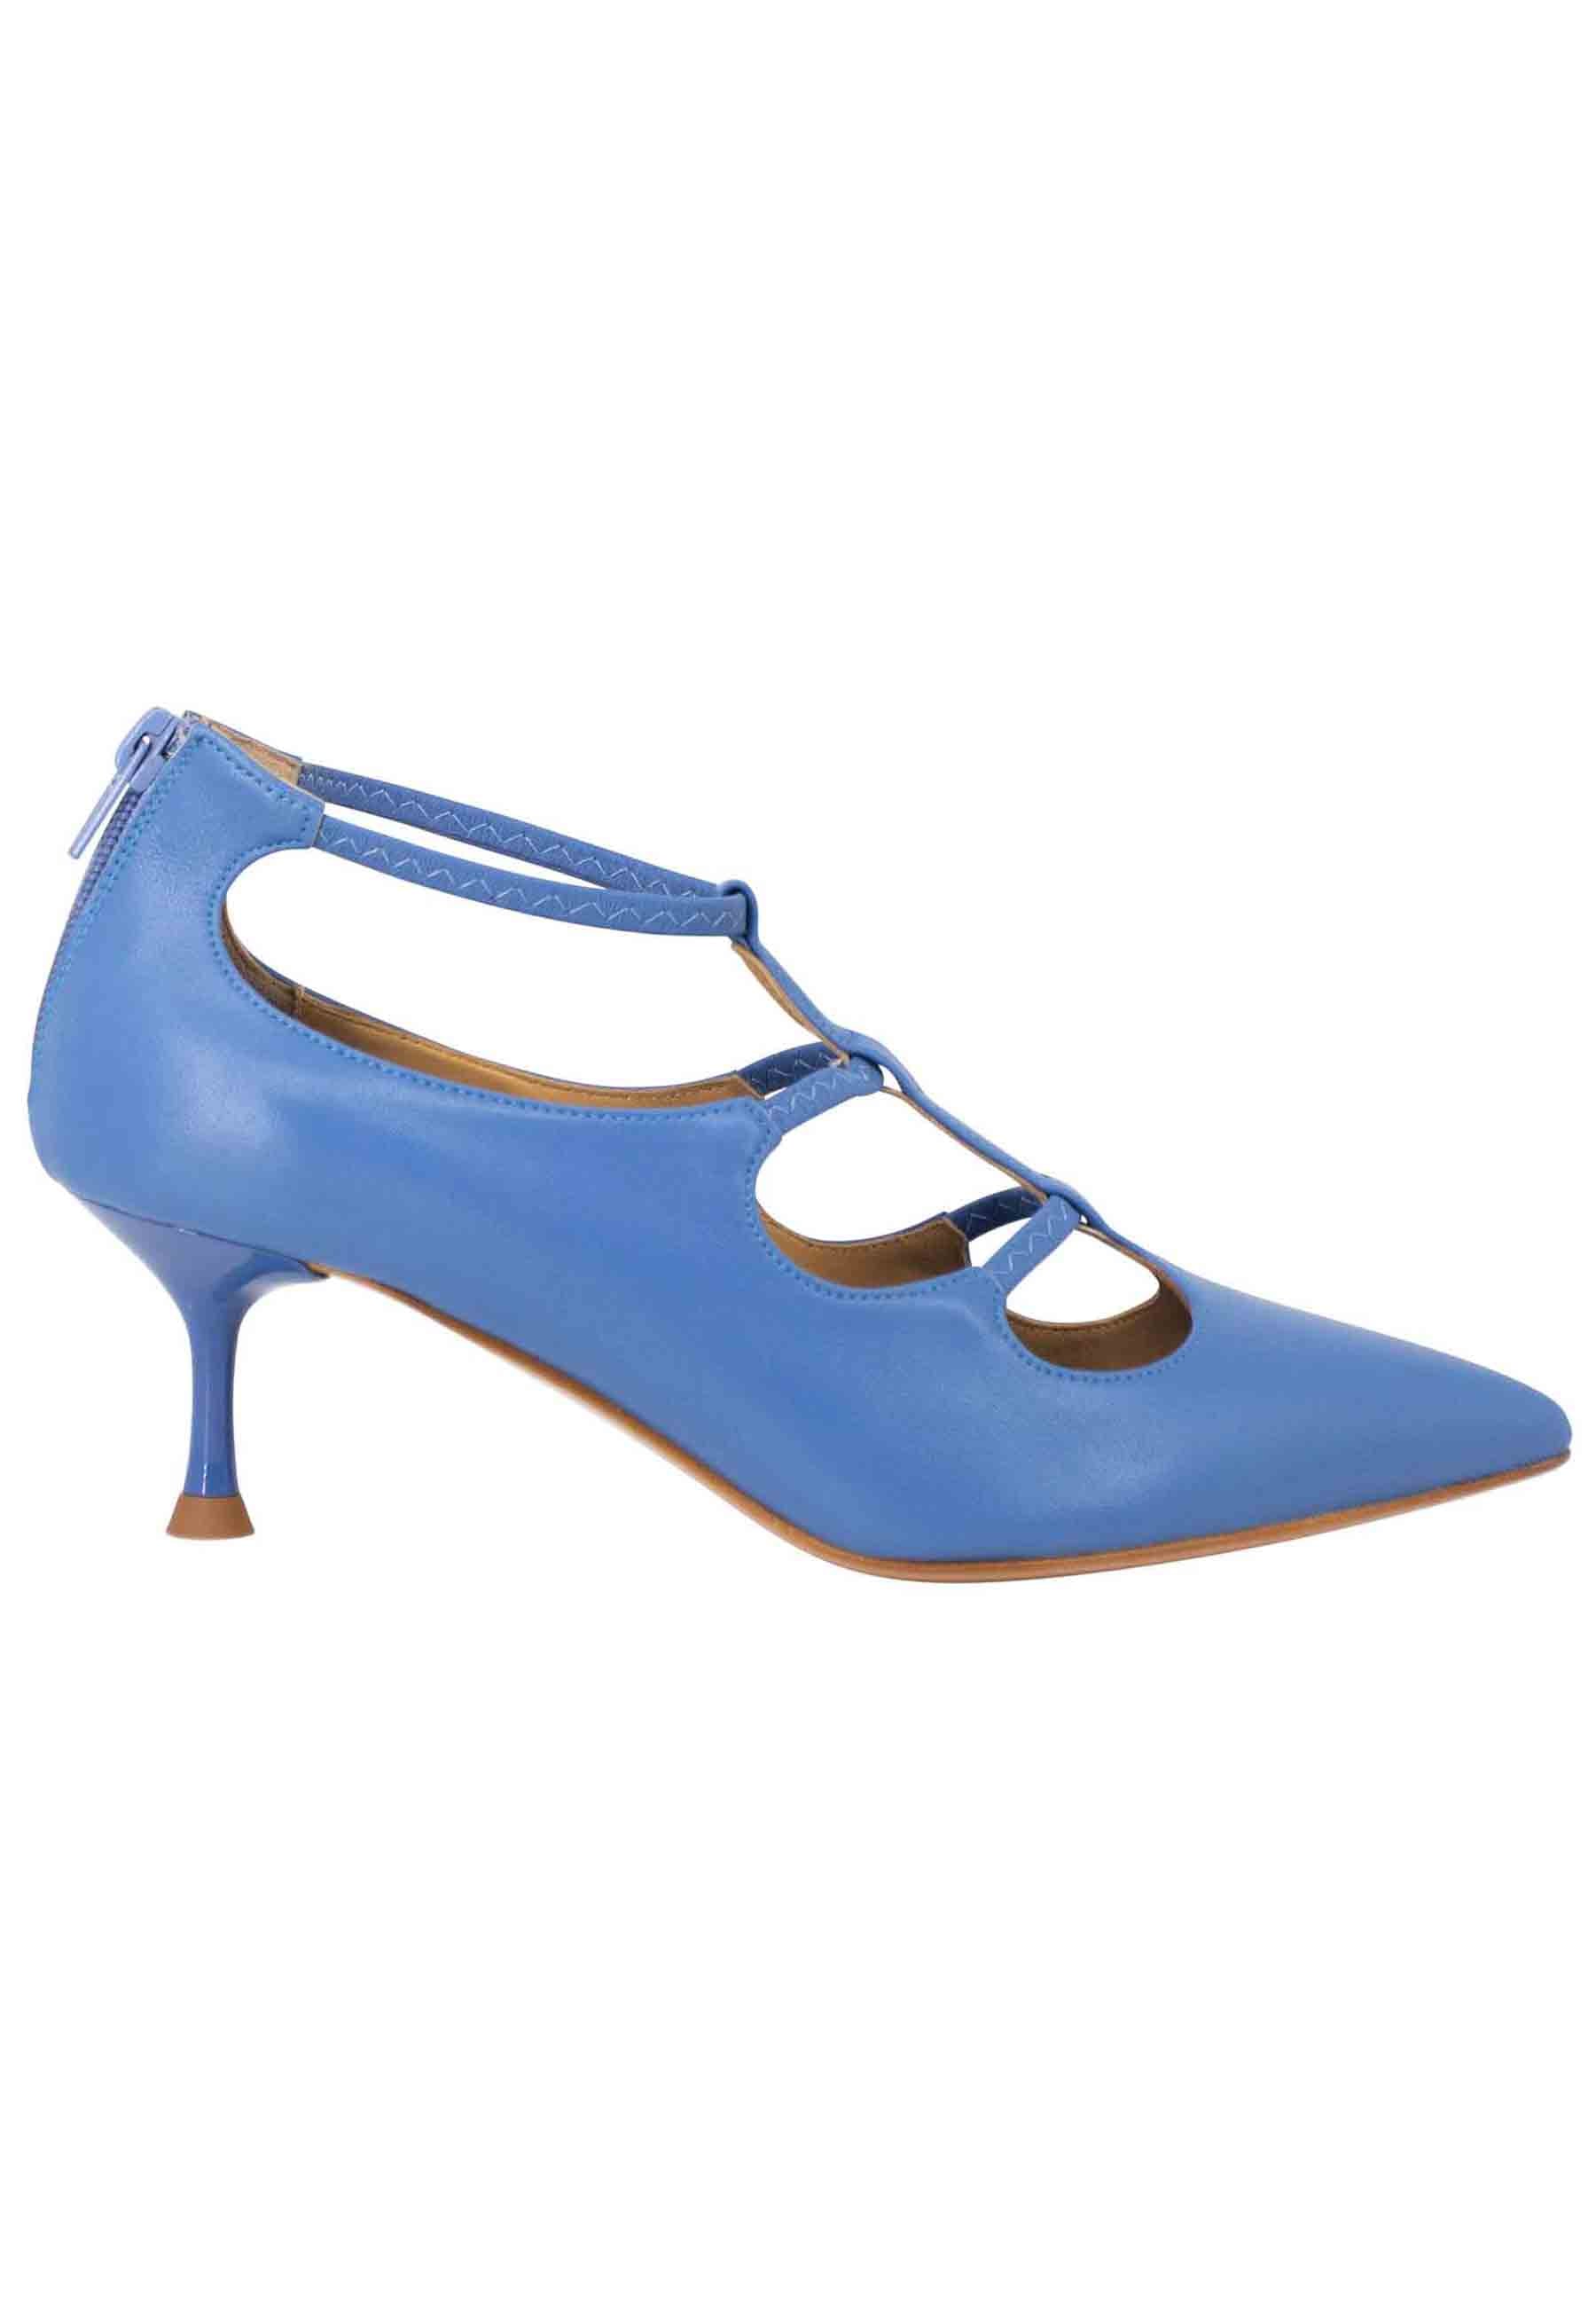 Women's pumps in light blue leather with straps and back zip